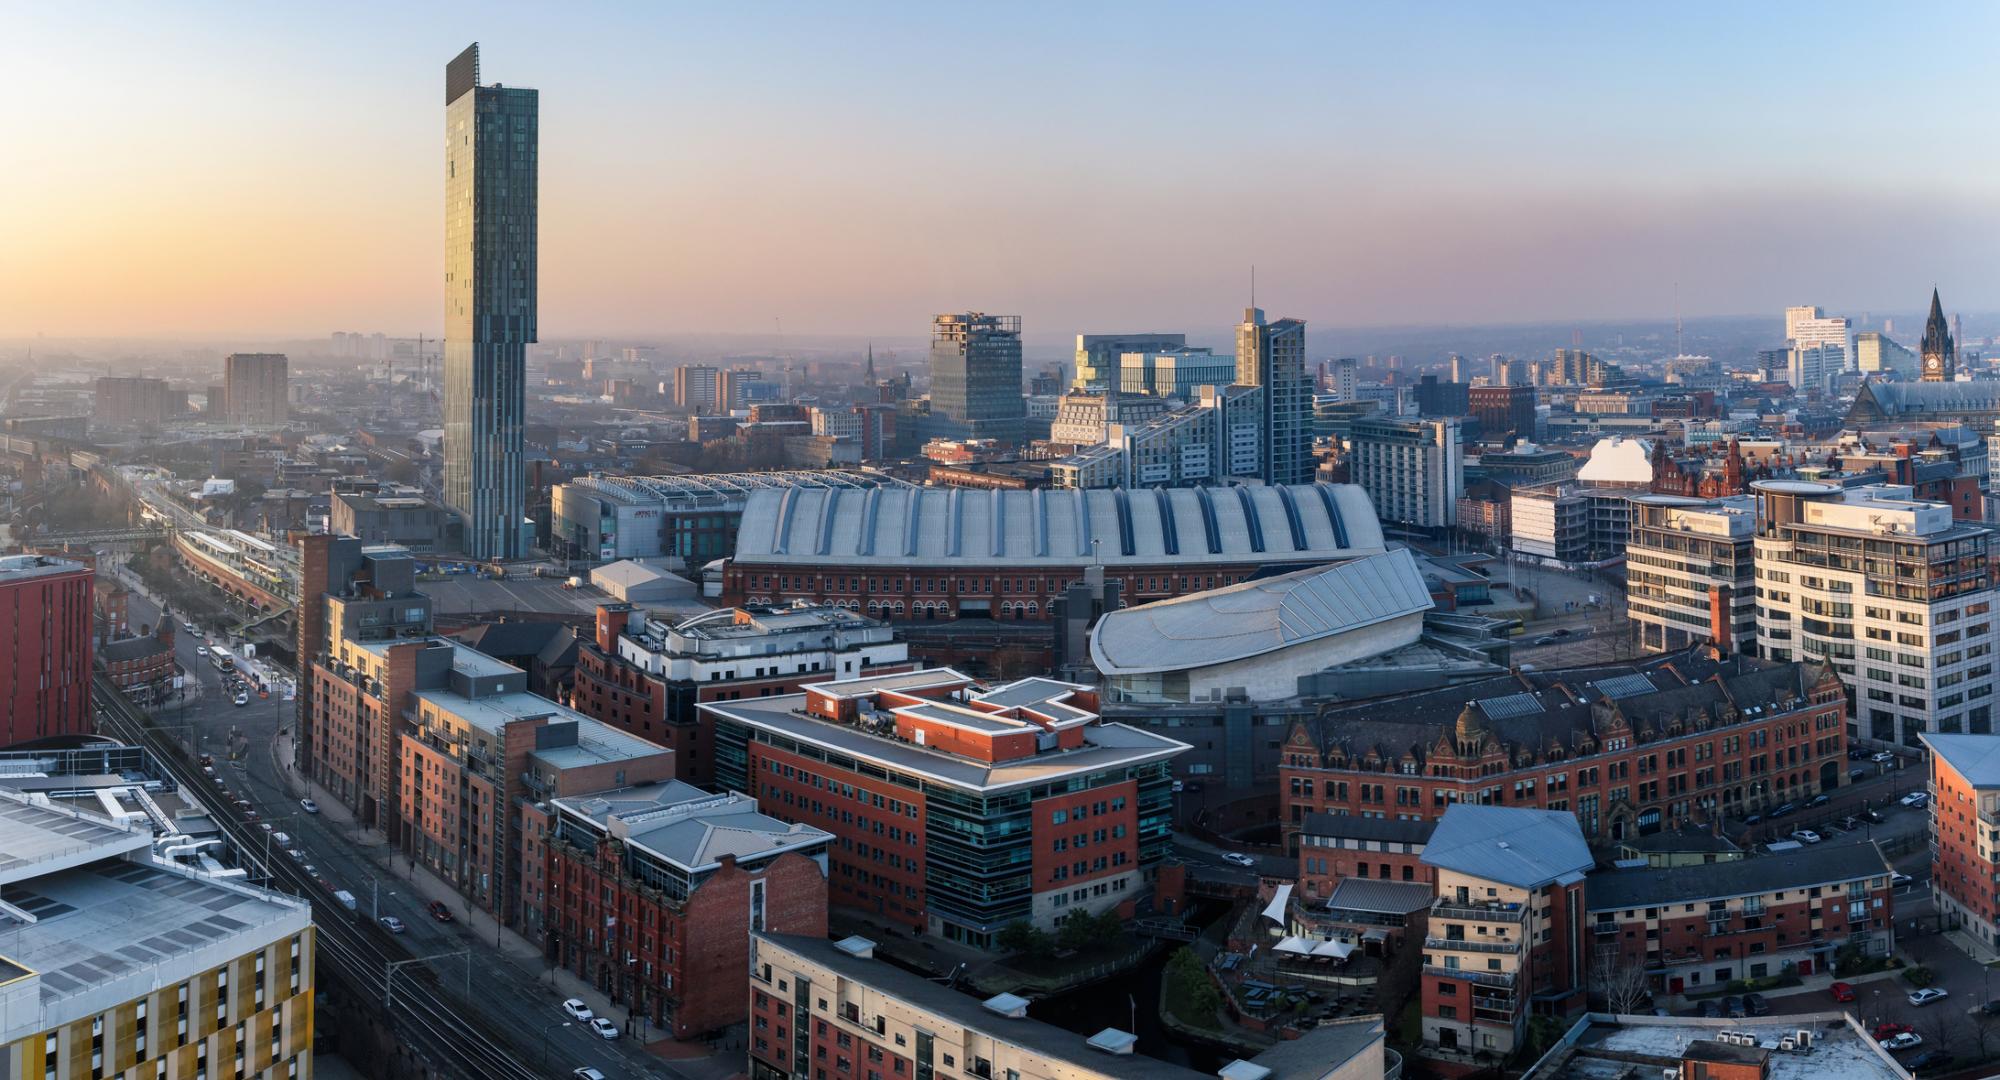 Aerial shot of Manchester city centre